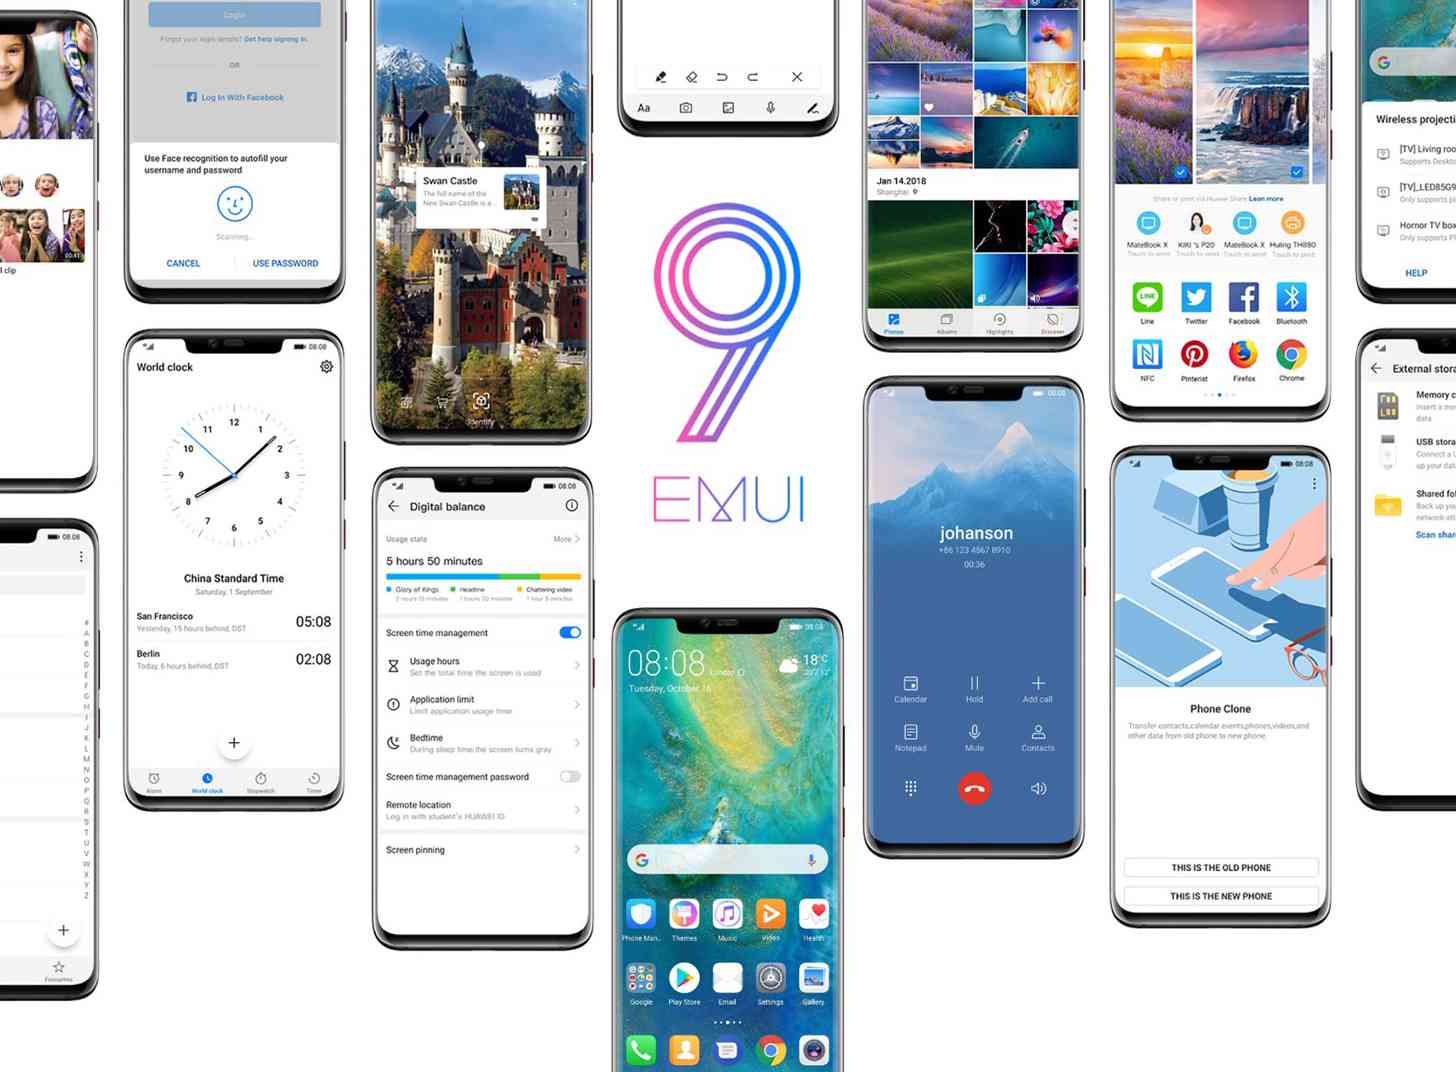 Huawei EMUI 9 features